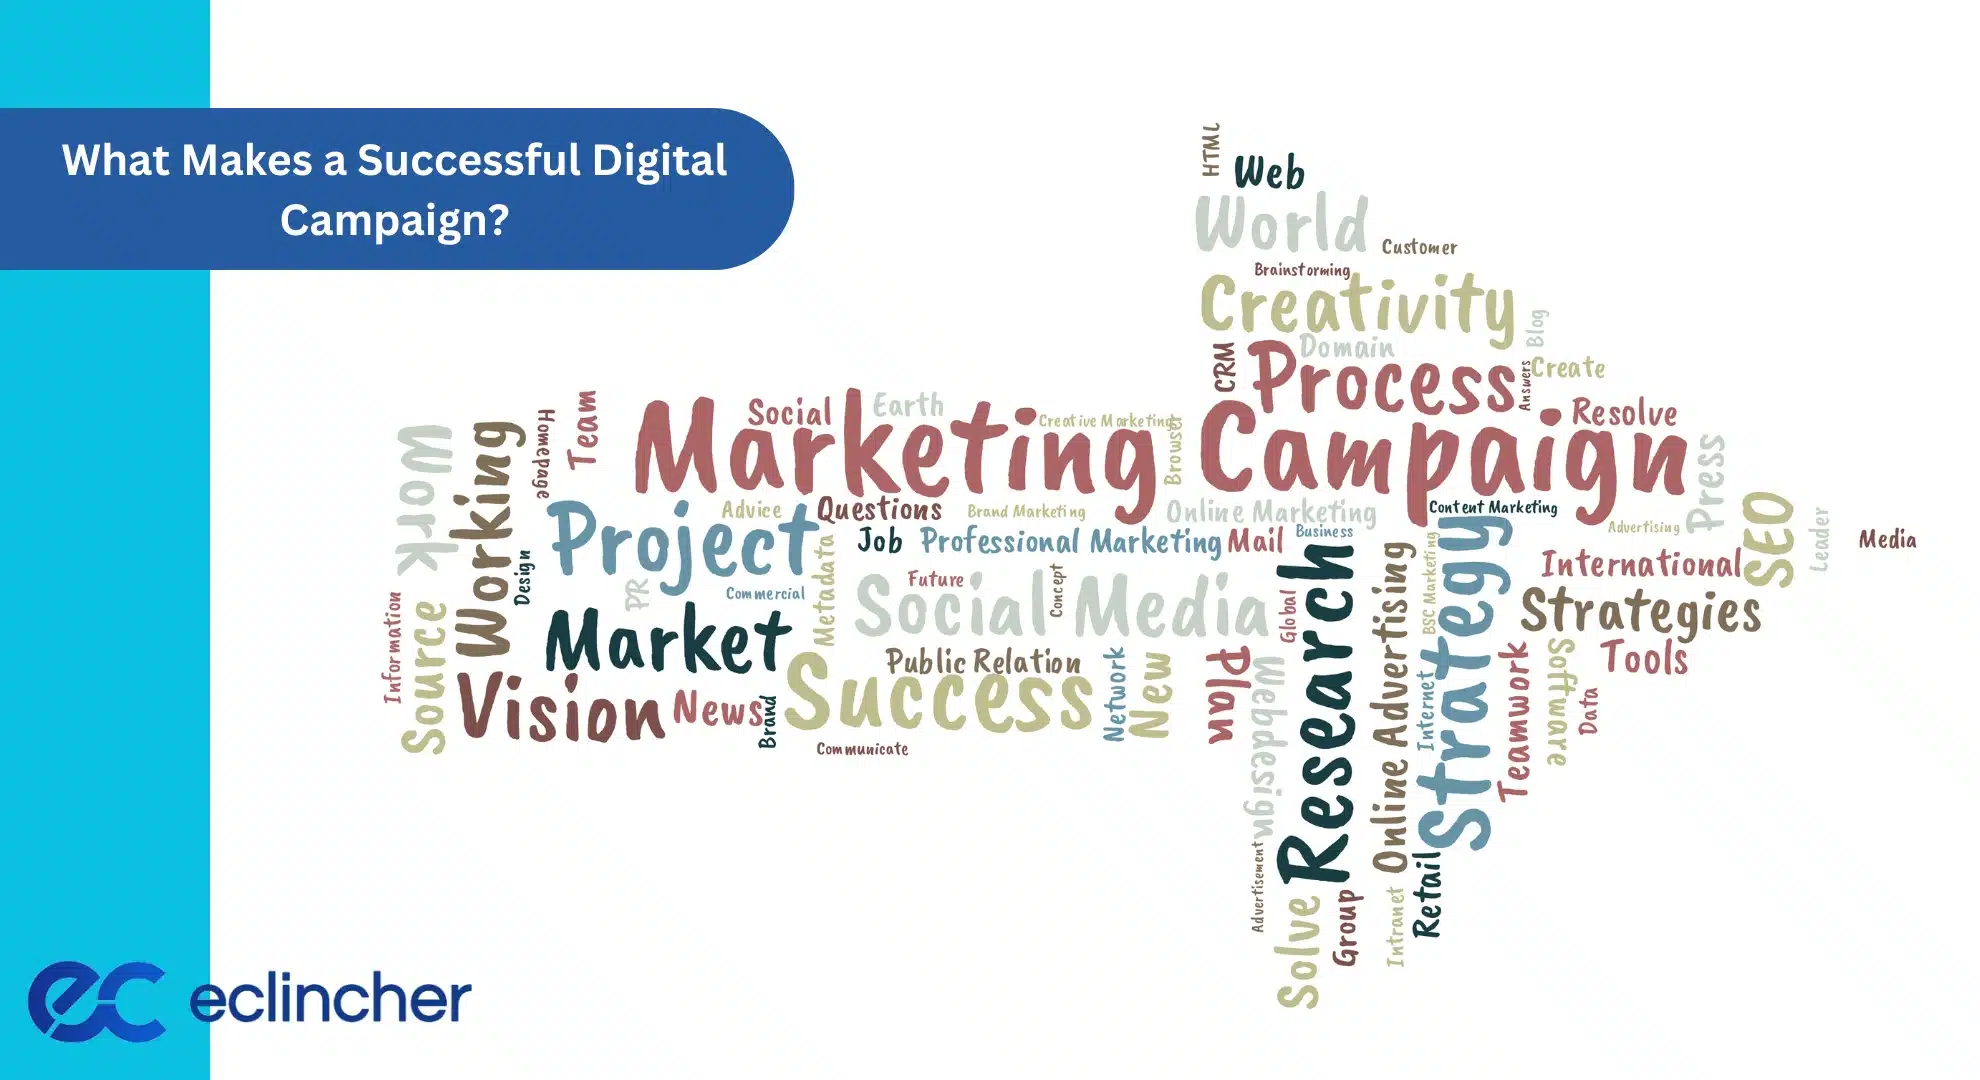 What Makes a Successful Digital Campaign